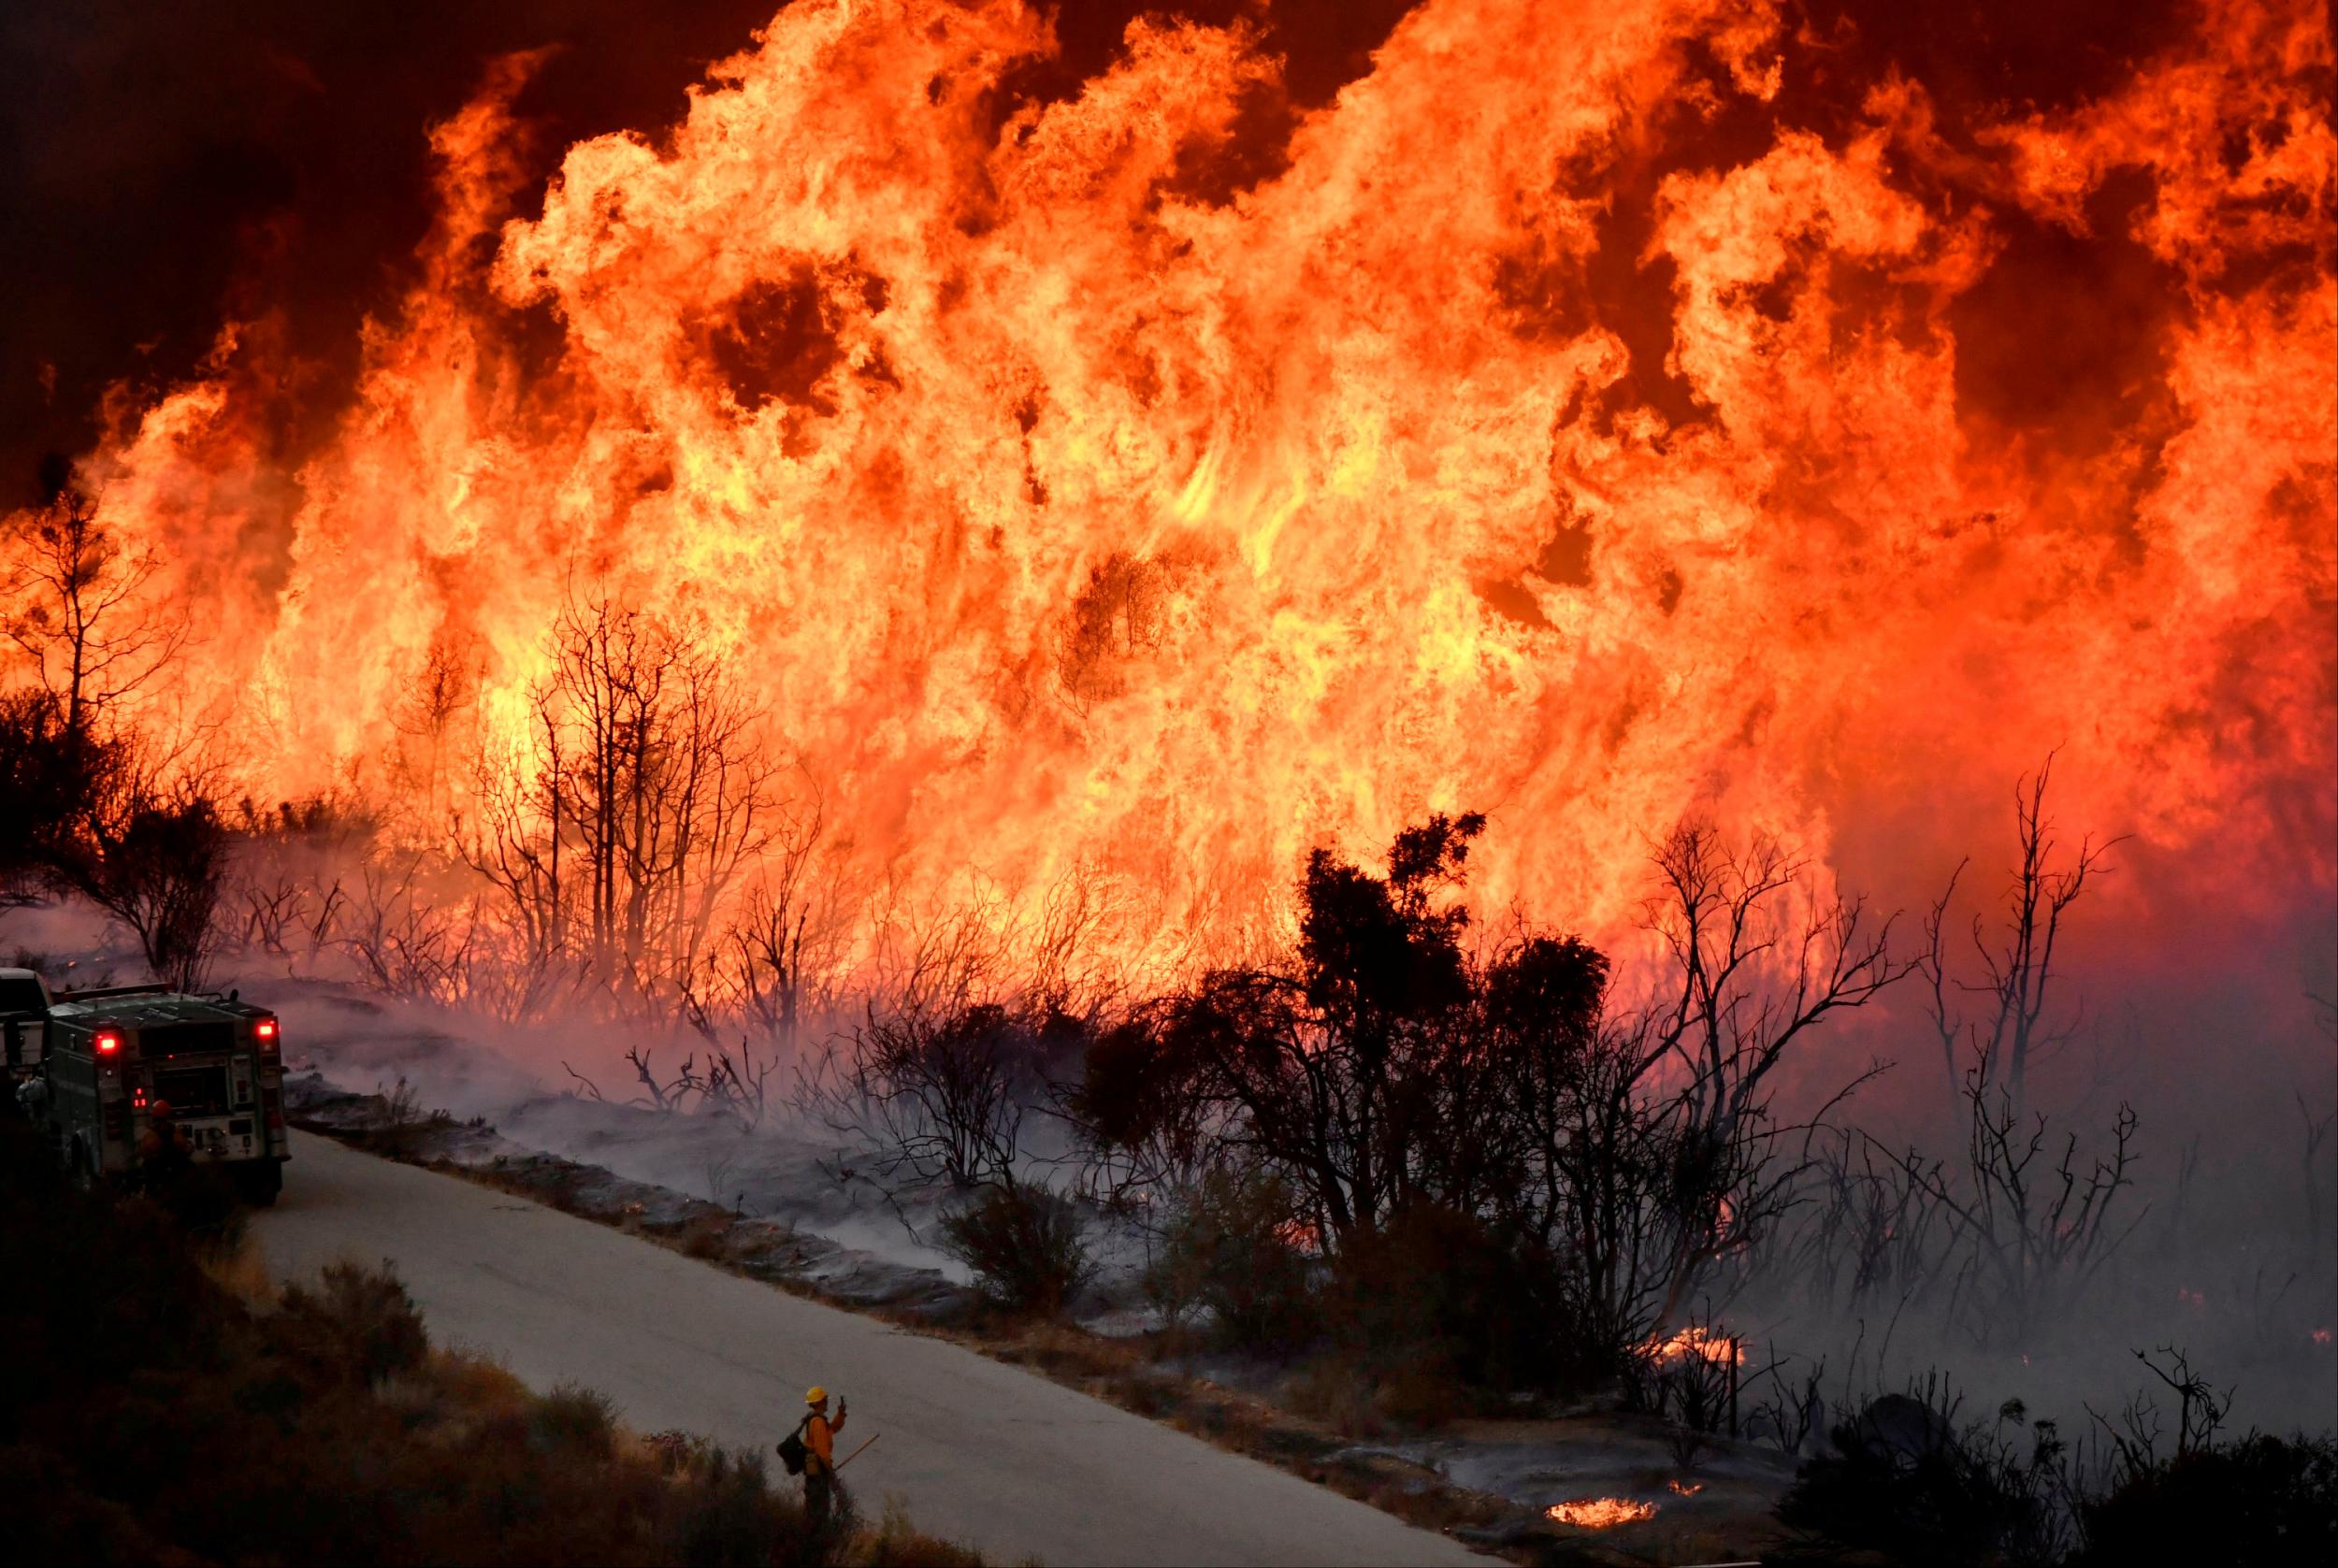 Rising temperatures due to global warming have been linked to devastating wildfires like the ones that ravaged California this year